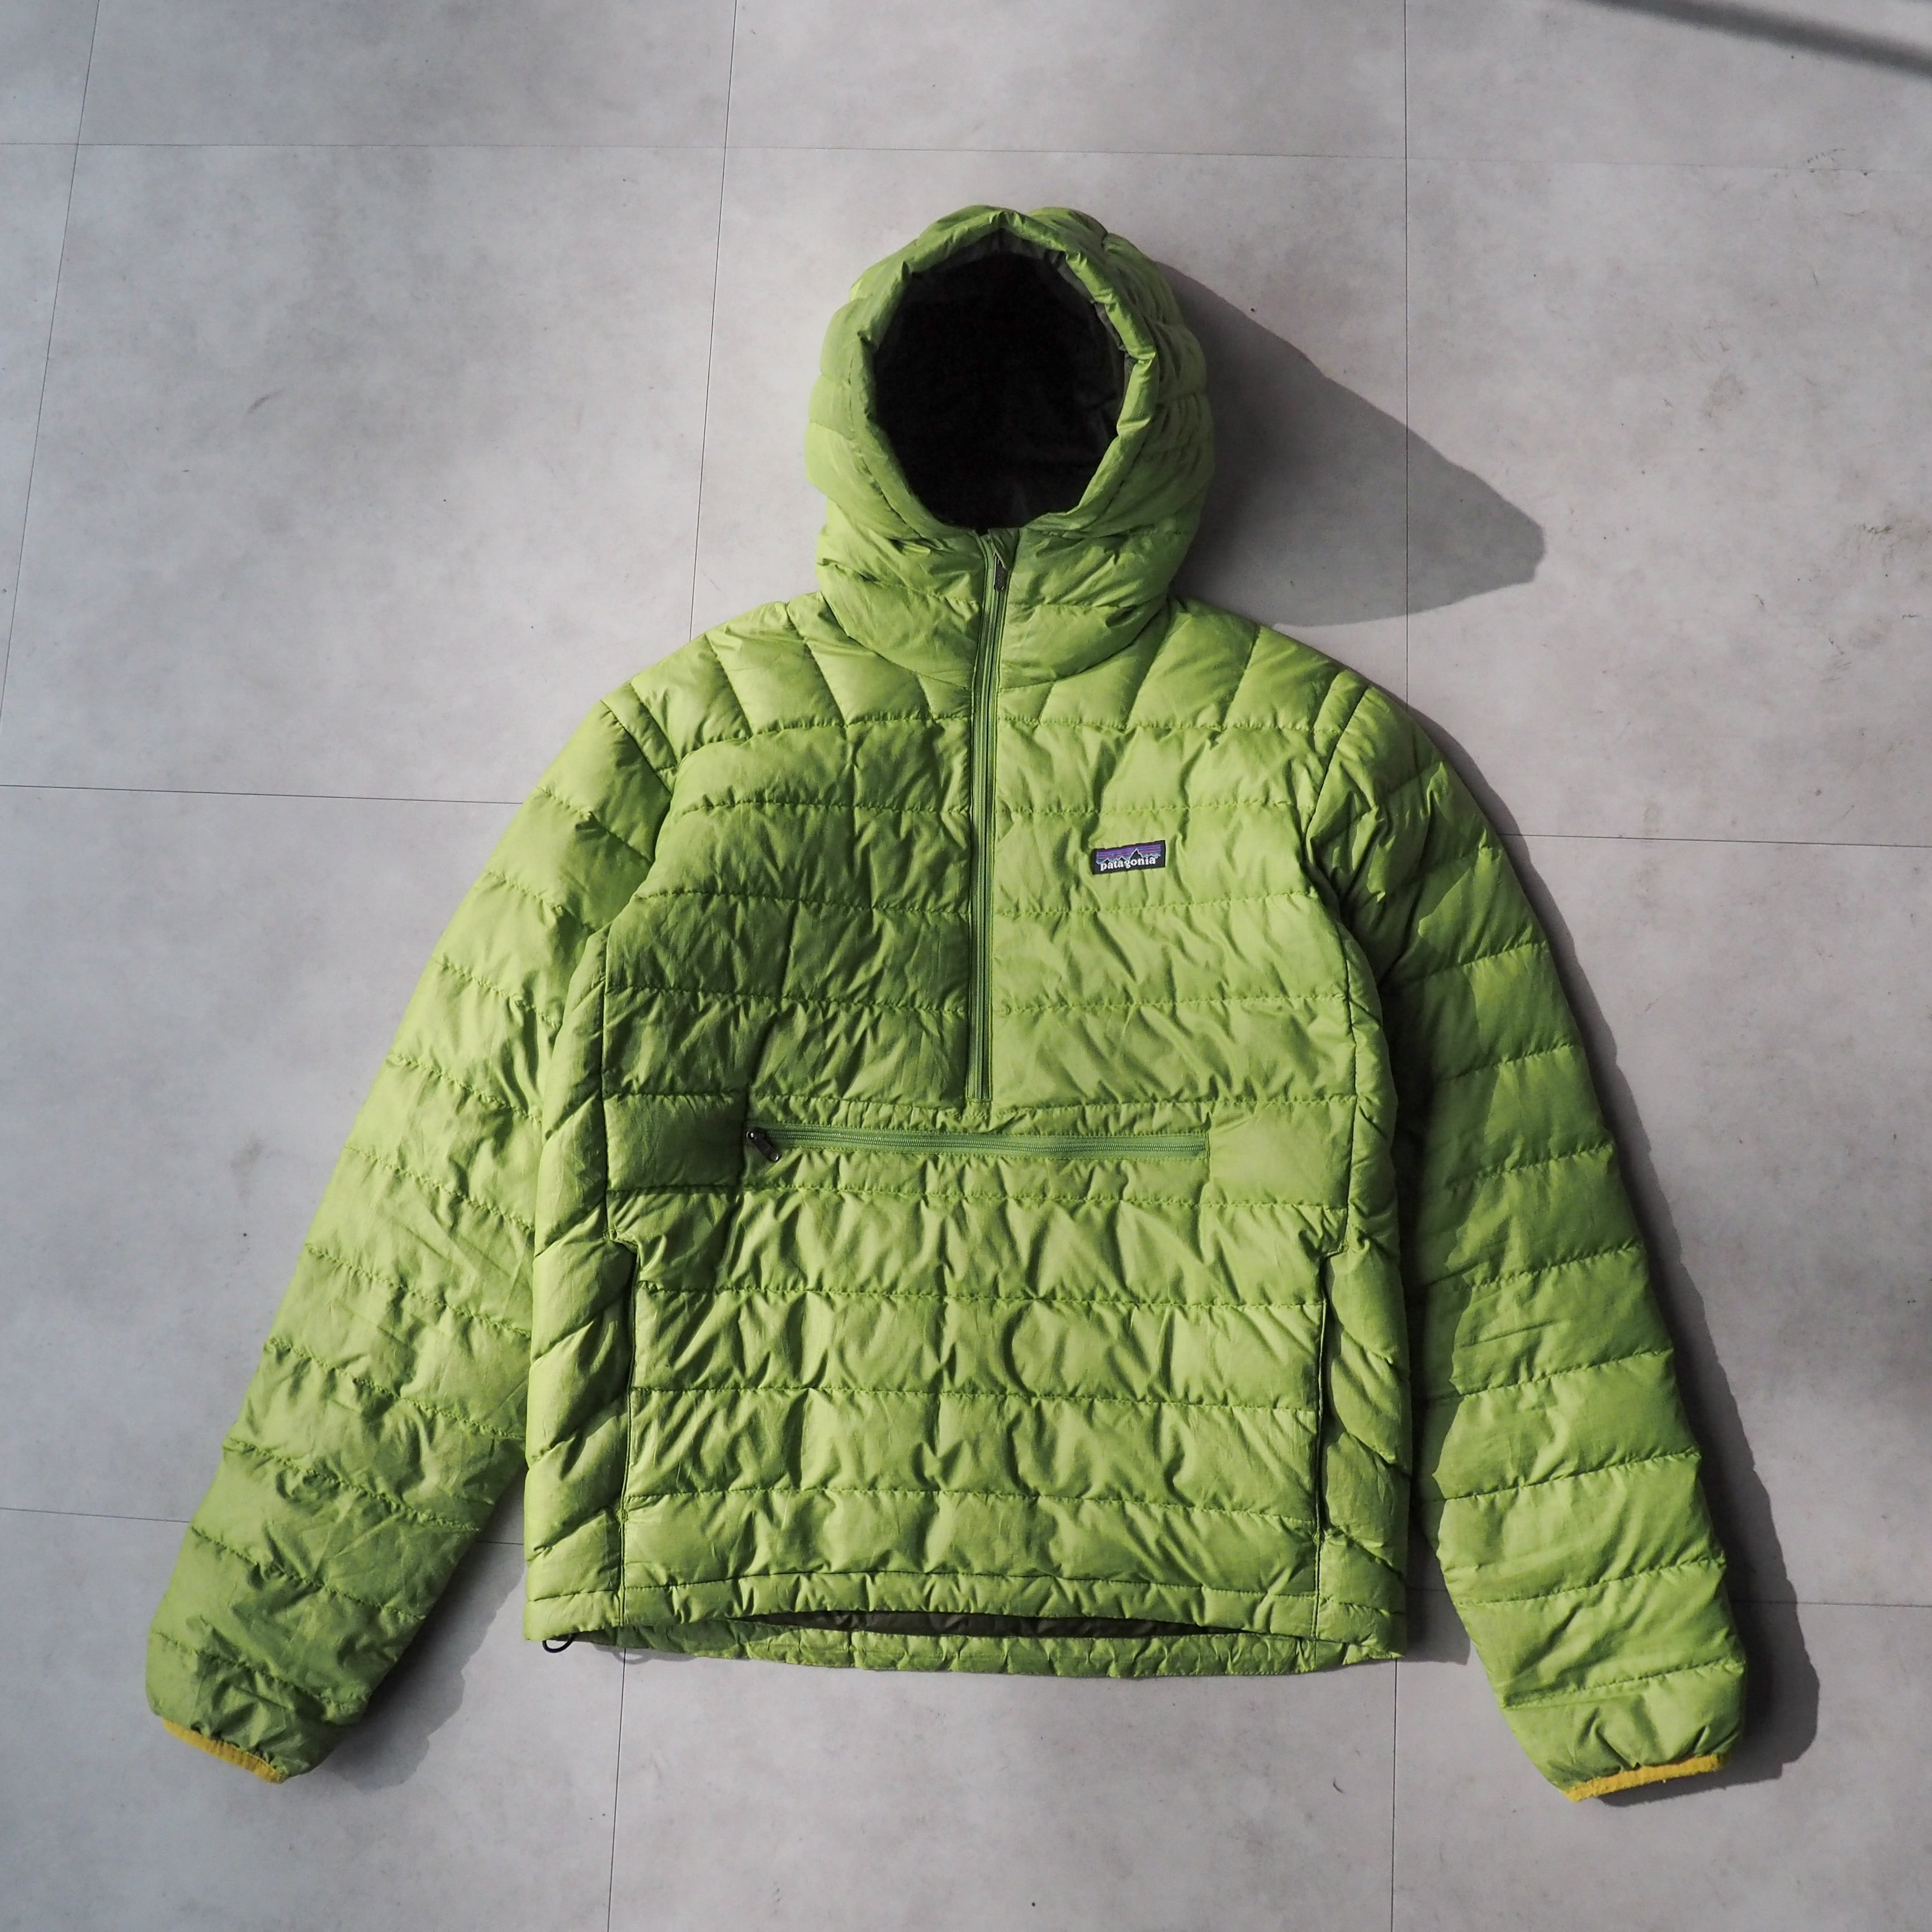 2008AW “Patagonia” down sweater pullover hoodie 2008年秋冬